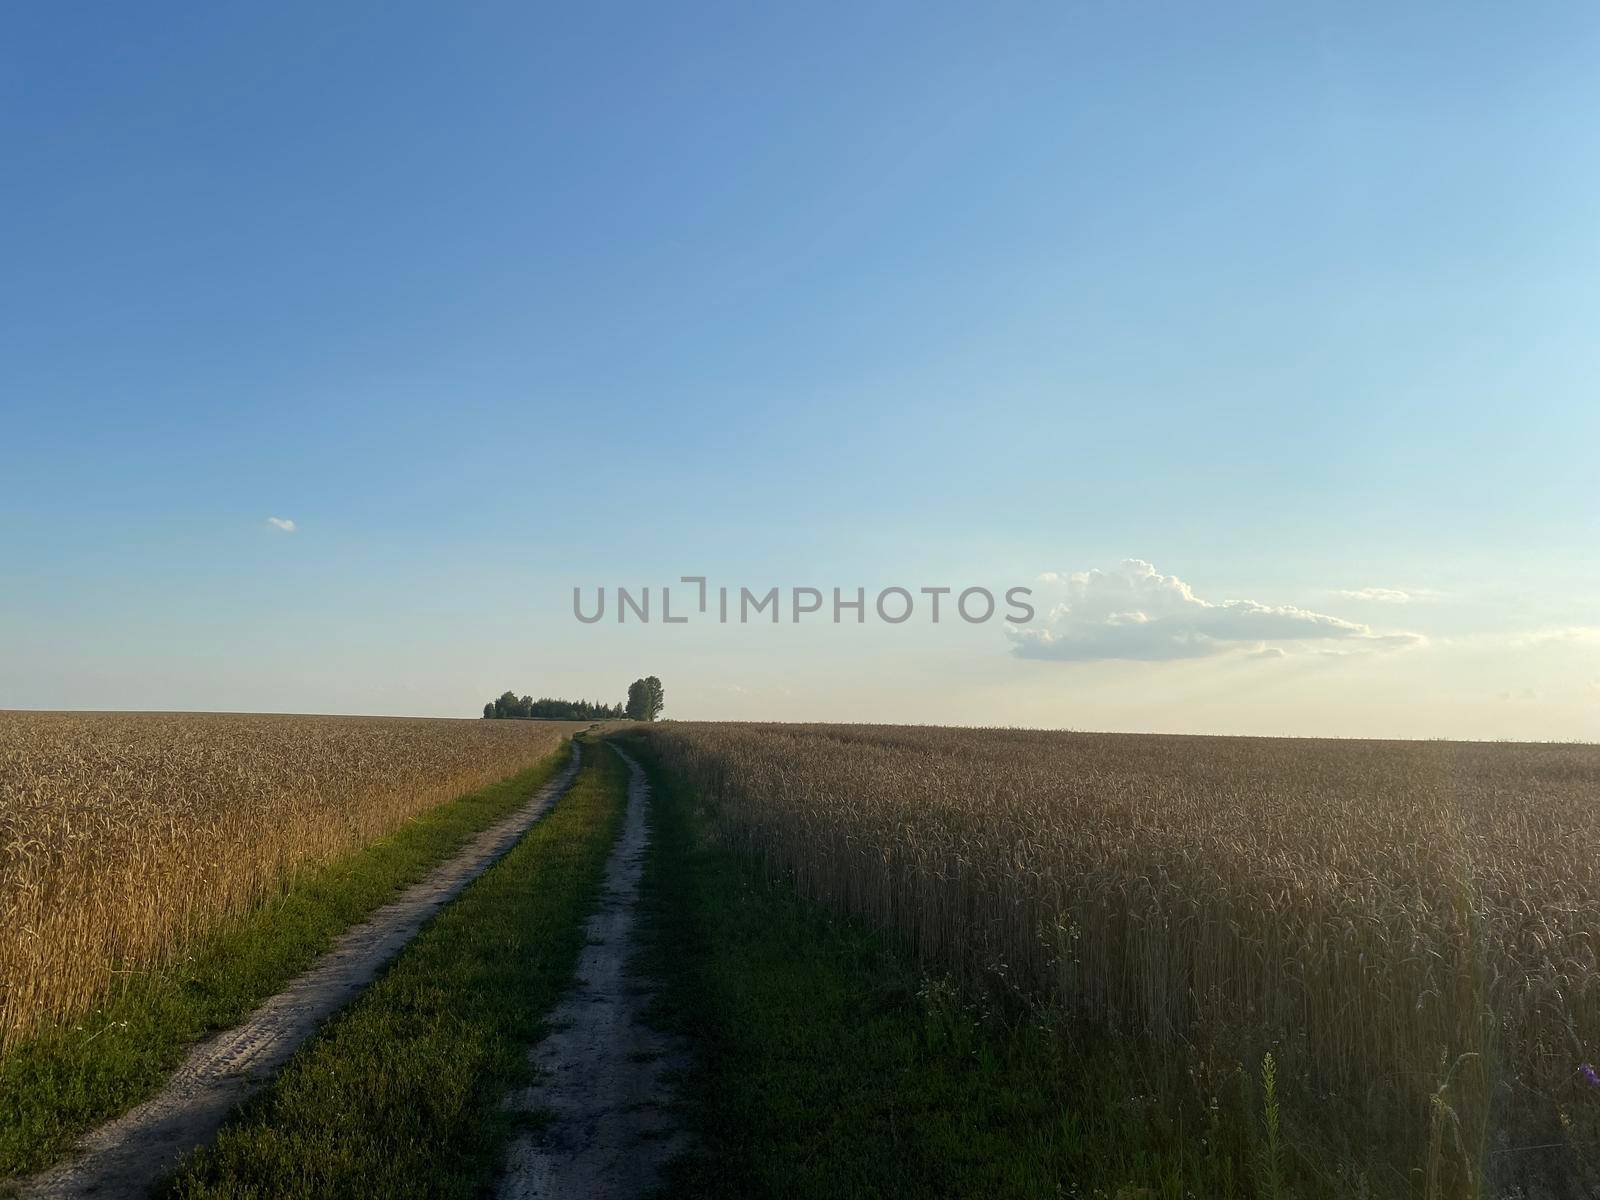 Panoramic view of the golden wheat field in summer. Wheat field on a sunny day. A path in a wheat field